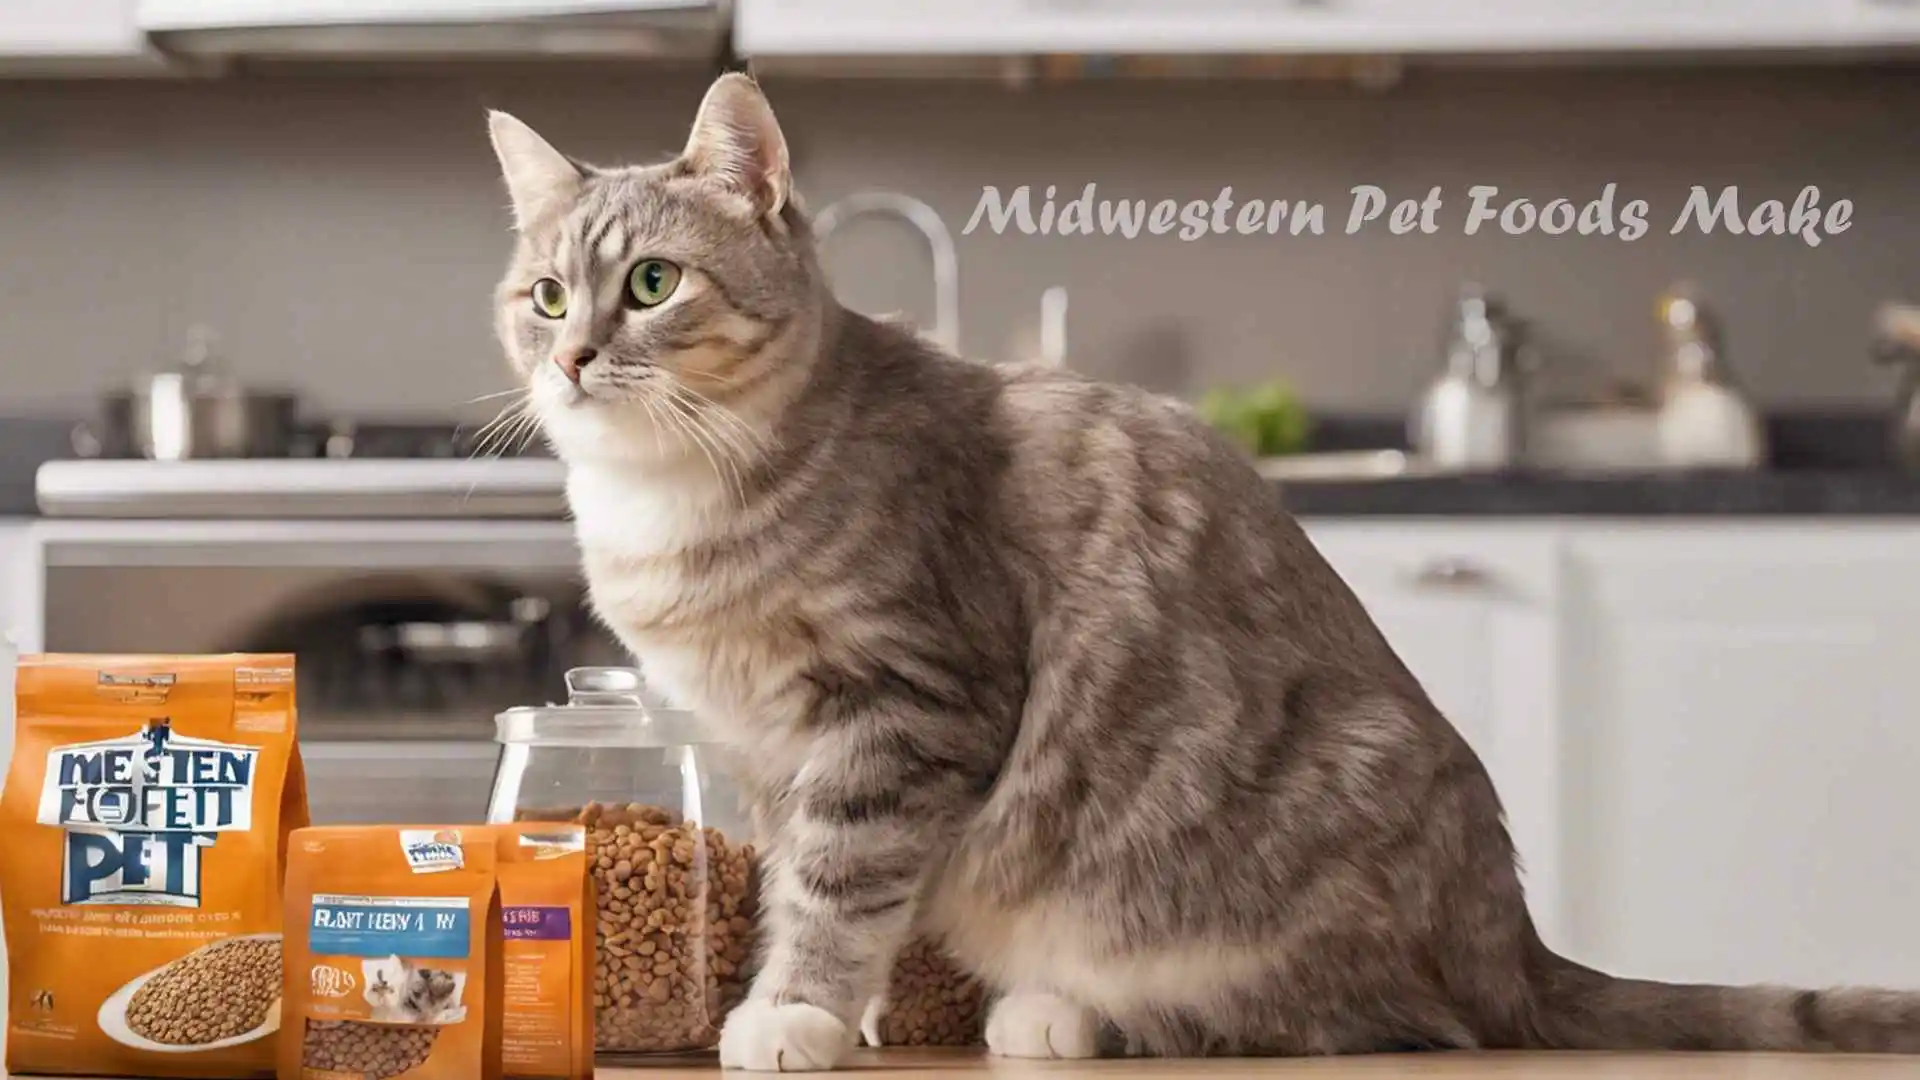 What Pet Foods Does Midwestern Pet Foods Make